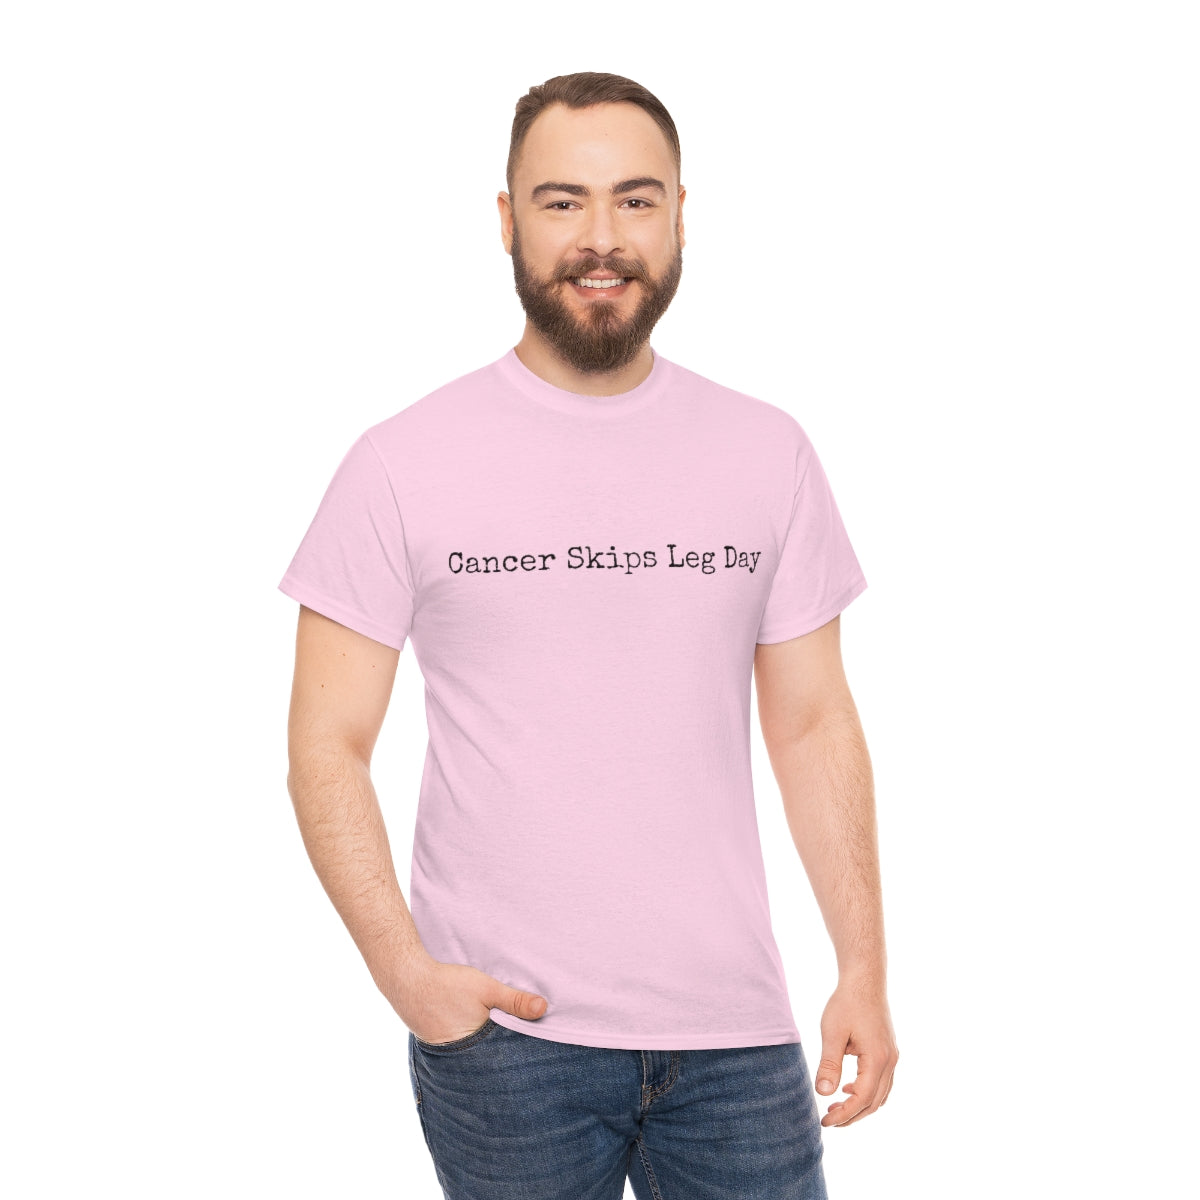 Unisex Heavy Cotton Tee Mens Womens Apparel Clothing Anti Cancer Cancer is Dumb Survivor Support Humorous Funny